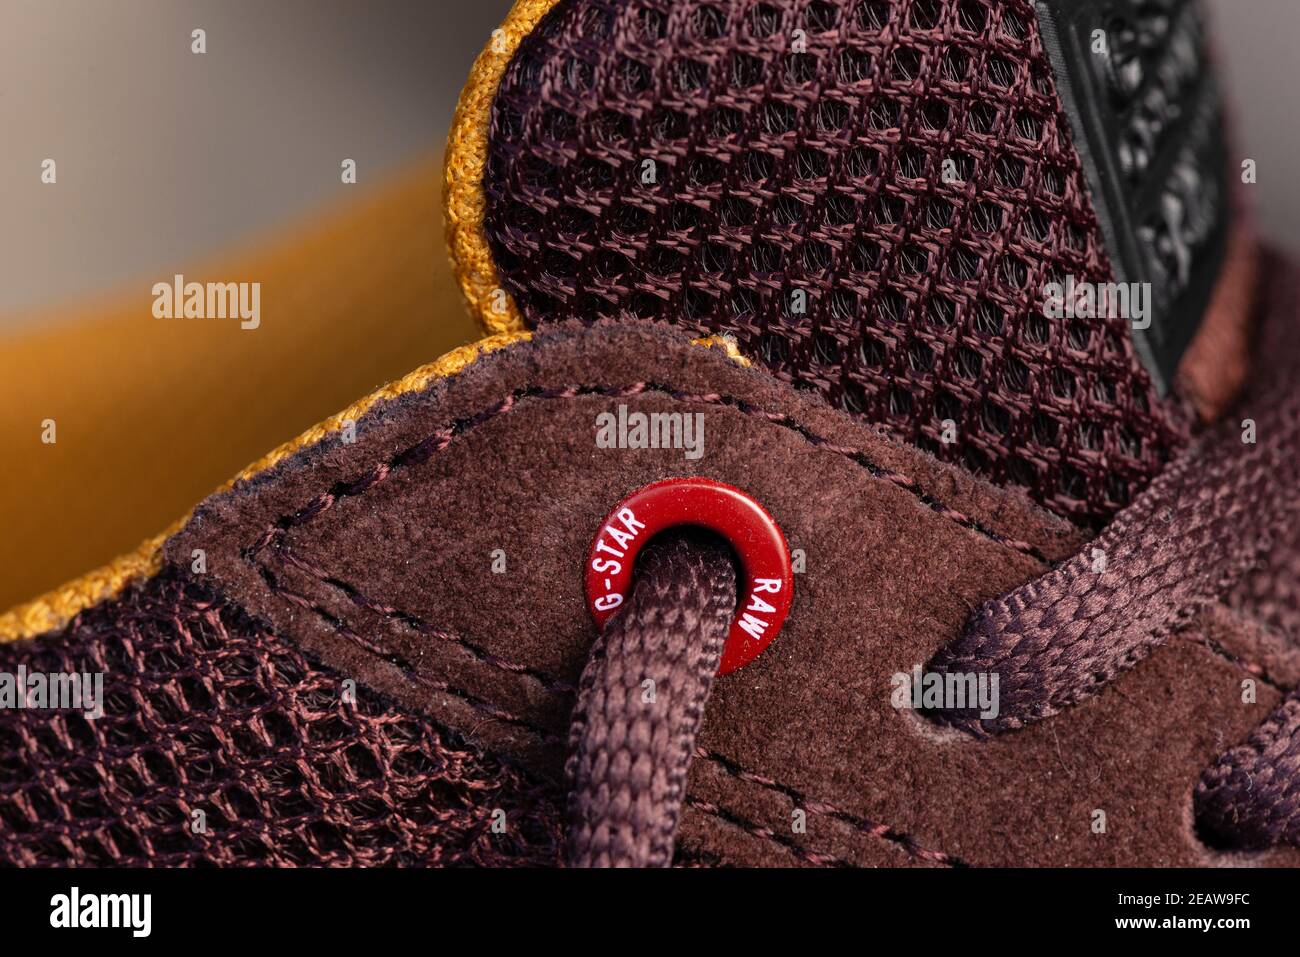 G-Star Raw branded red eyelet of casual burgundy men's shoes close up detail Stock Photo